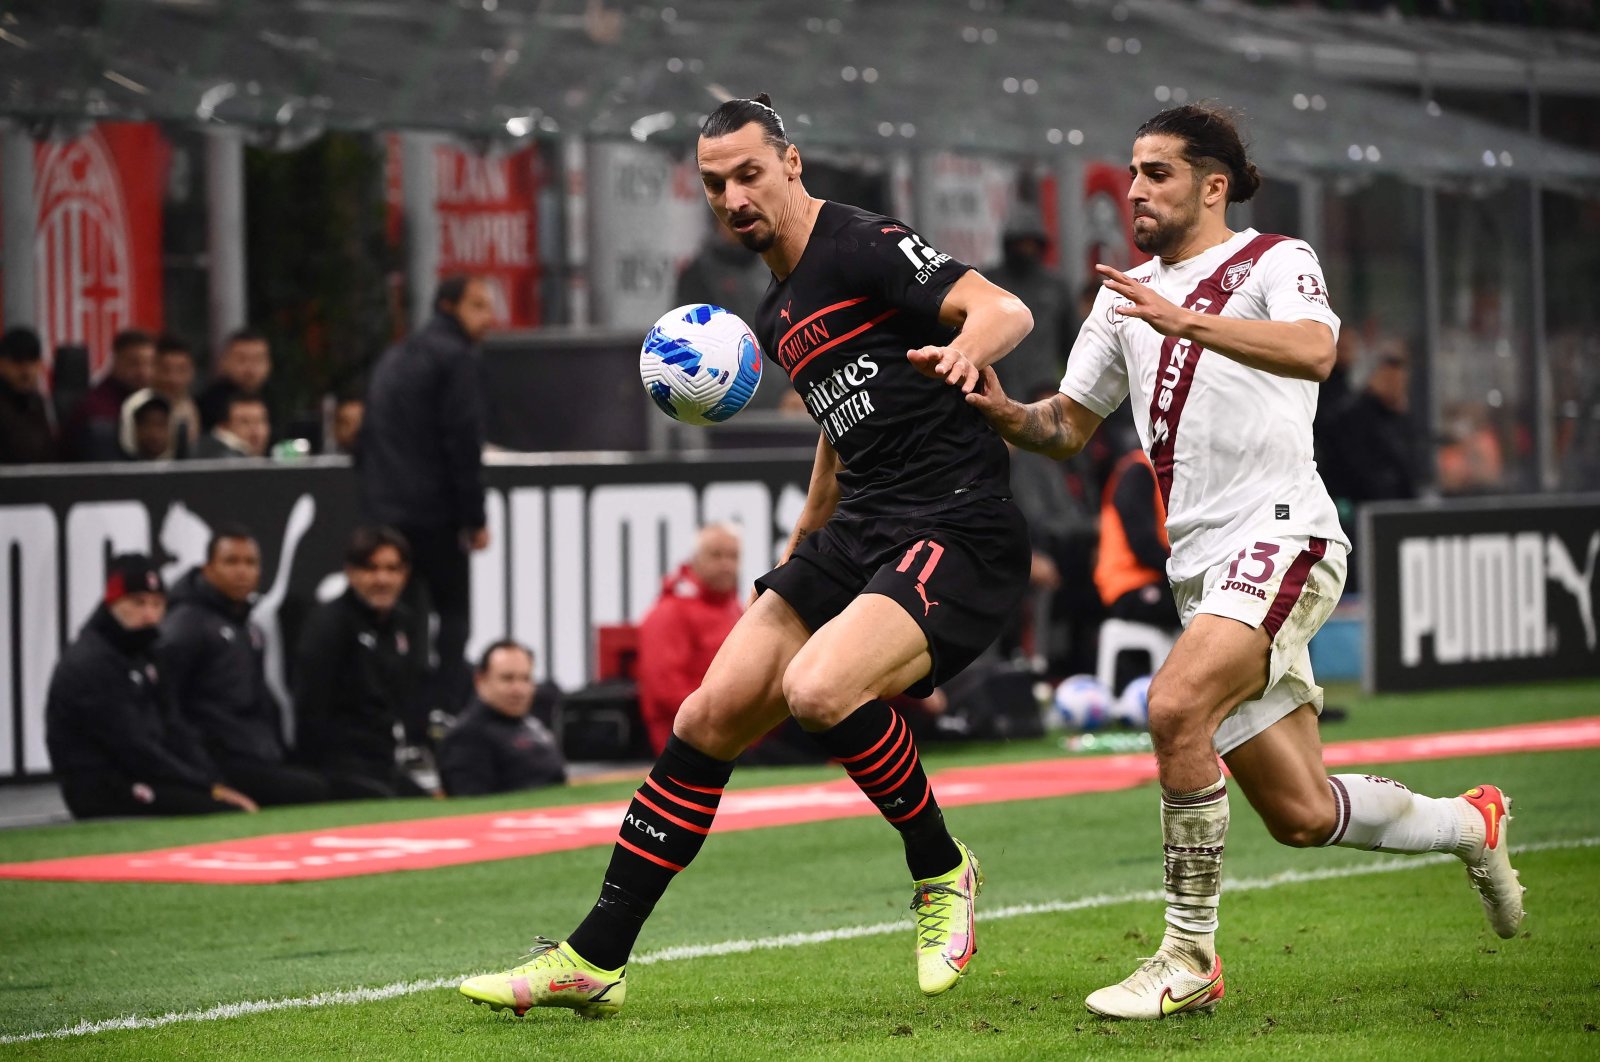 AC Milan's Zlatan Ibrahimovic (L) fights for the ball with Torino's Ricardo Rodriguez (R) during a Serie A match at the San Siro in Milan, Italy, Oct. 26, 2021. (AFP Photo)